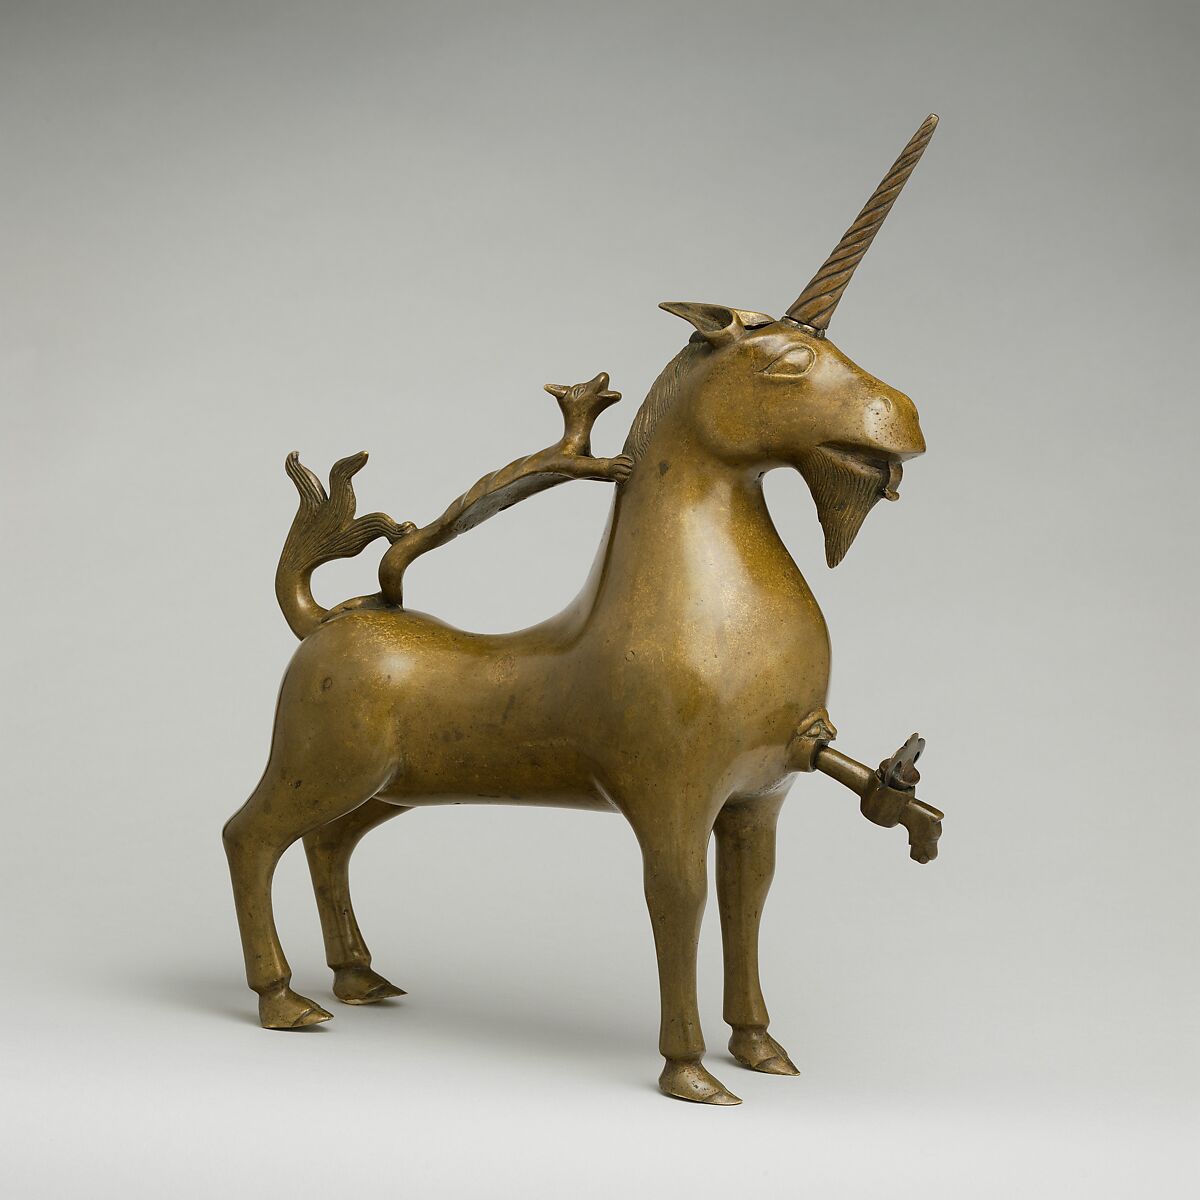 Aquamanile in the Form of a Unicorn, Copper alloy, German 